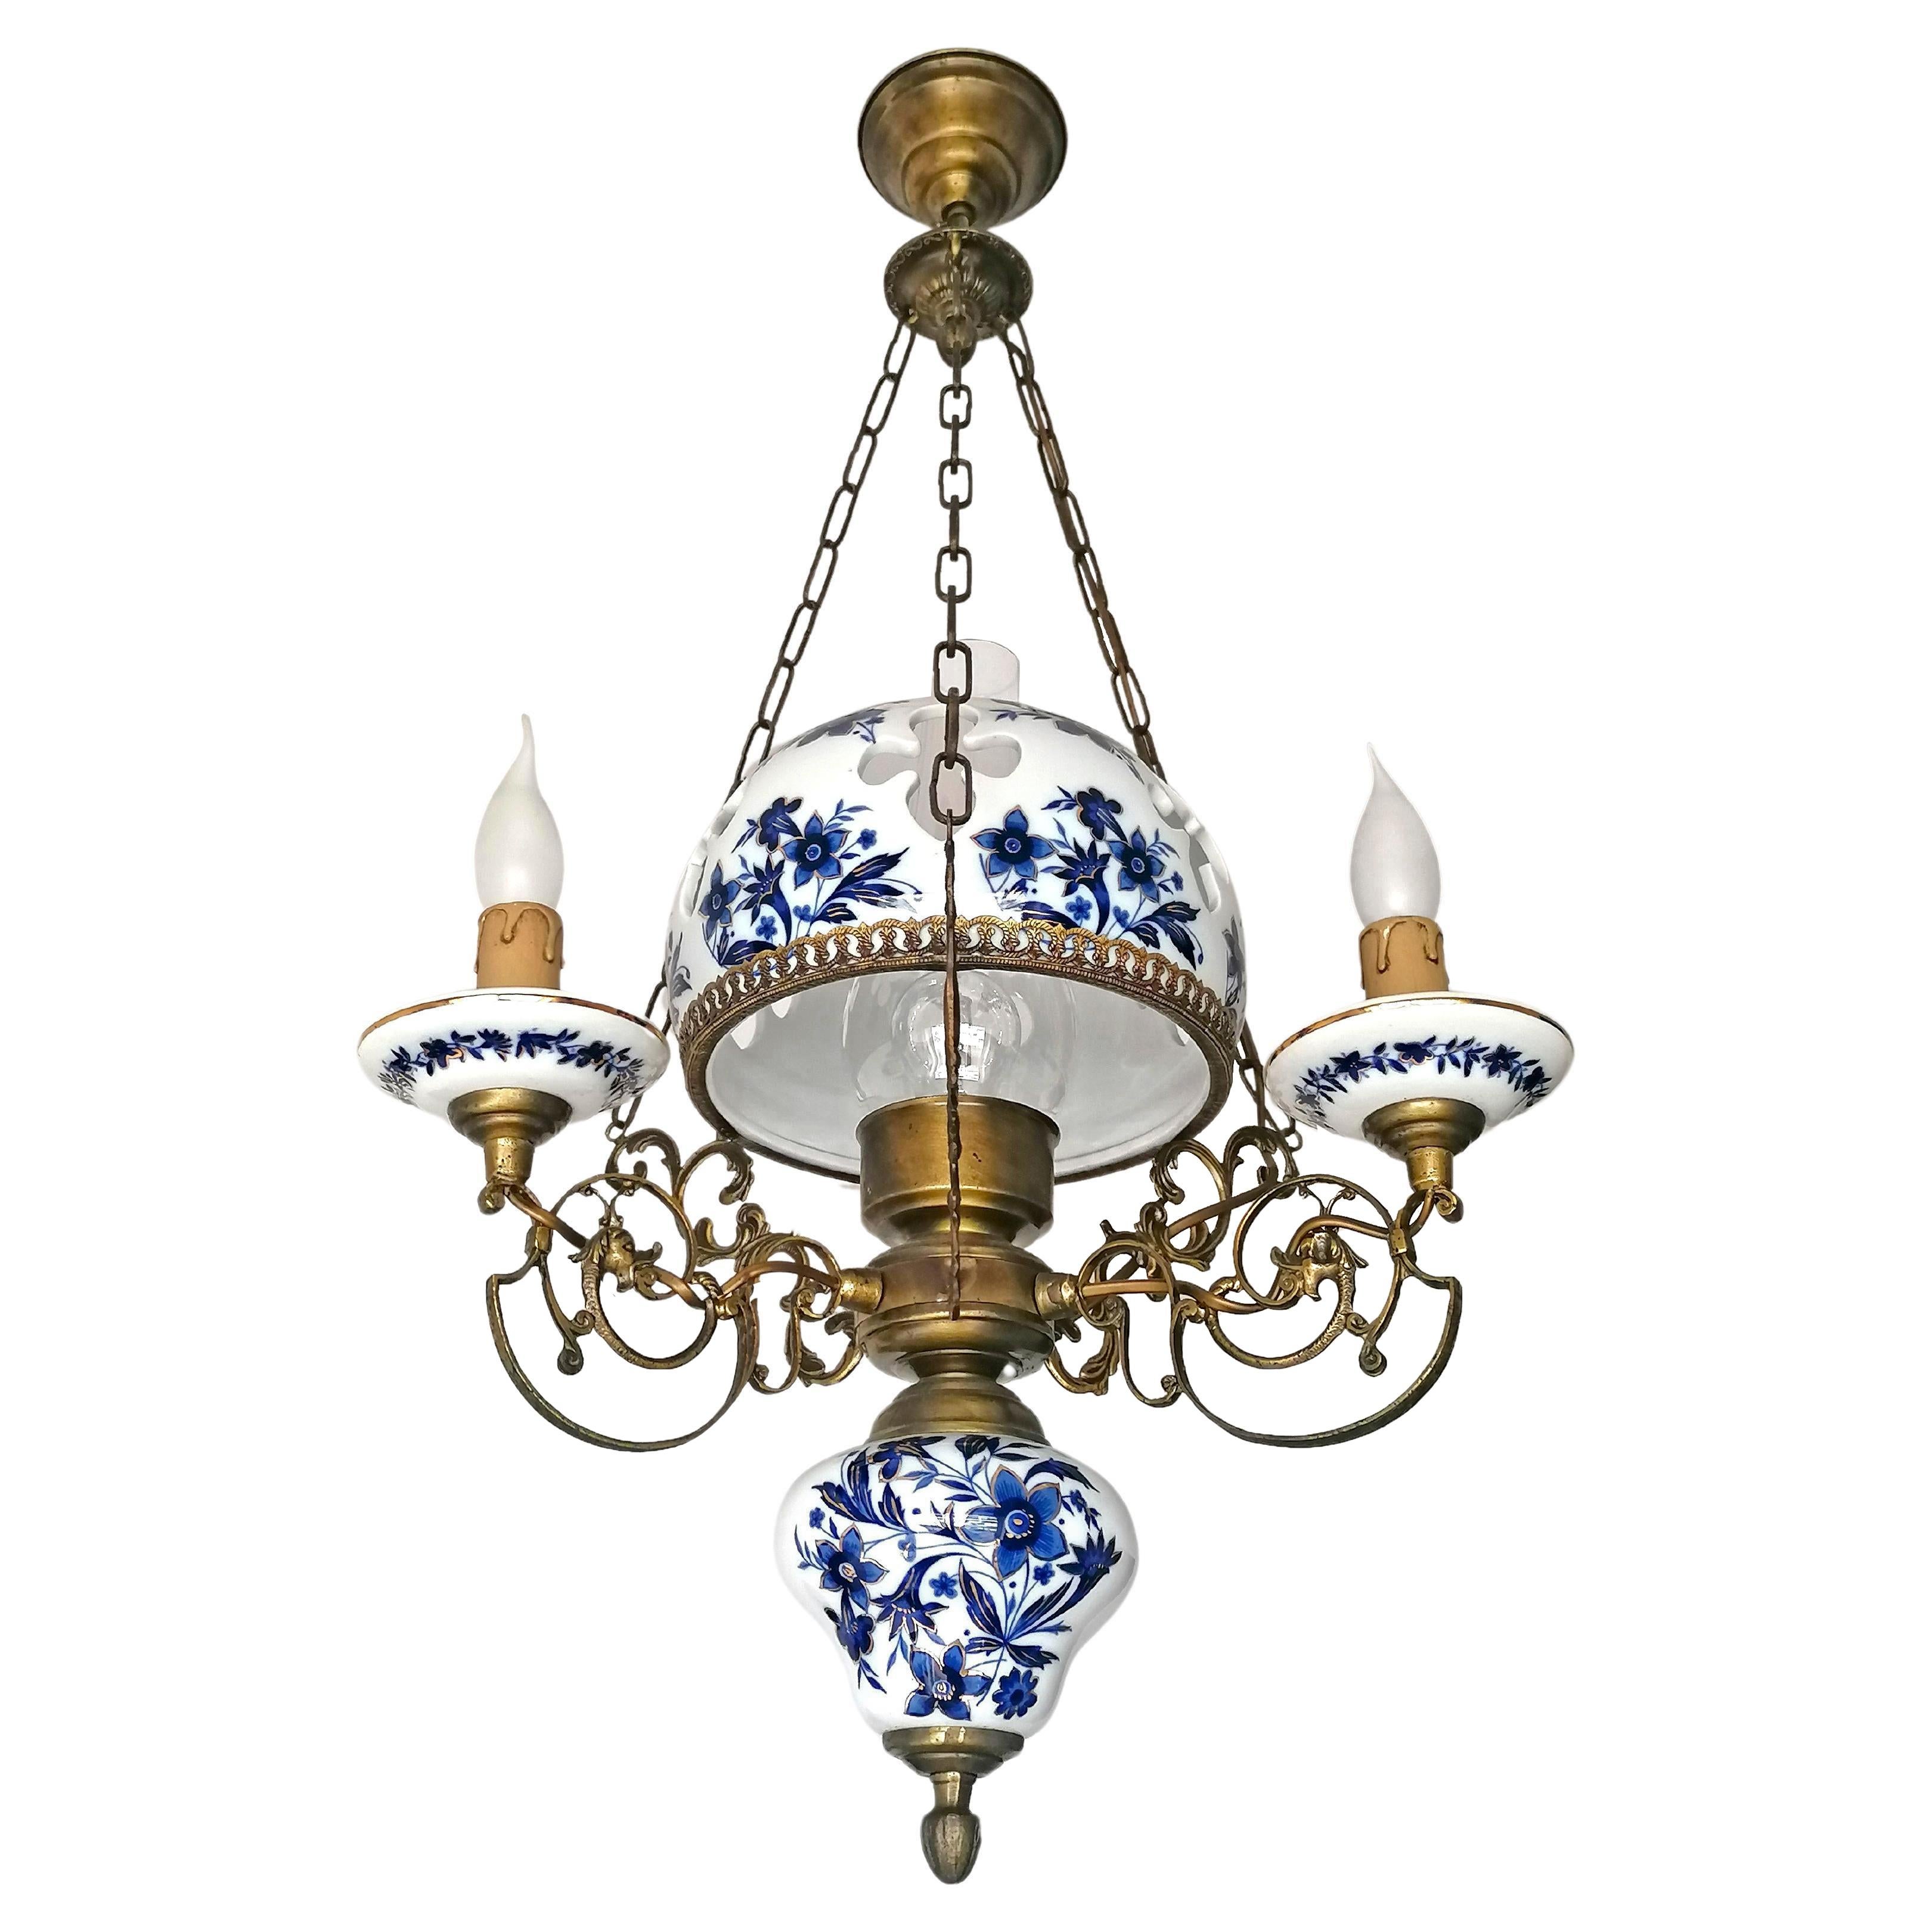 Gorgeous Delft Style French Chandelier Victorian Oil Lamp Blue & Gold Hand Painted Carved Porcelain 

Dimensions: 
Height: 35.43 in. (90 cm)
Diameter: 19.68 in. (50 cm)
4 light bulbs E27, E 14 , Good working condition
Beautiful age patina.
Assembly